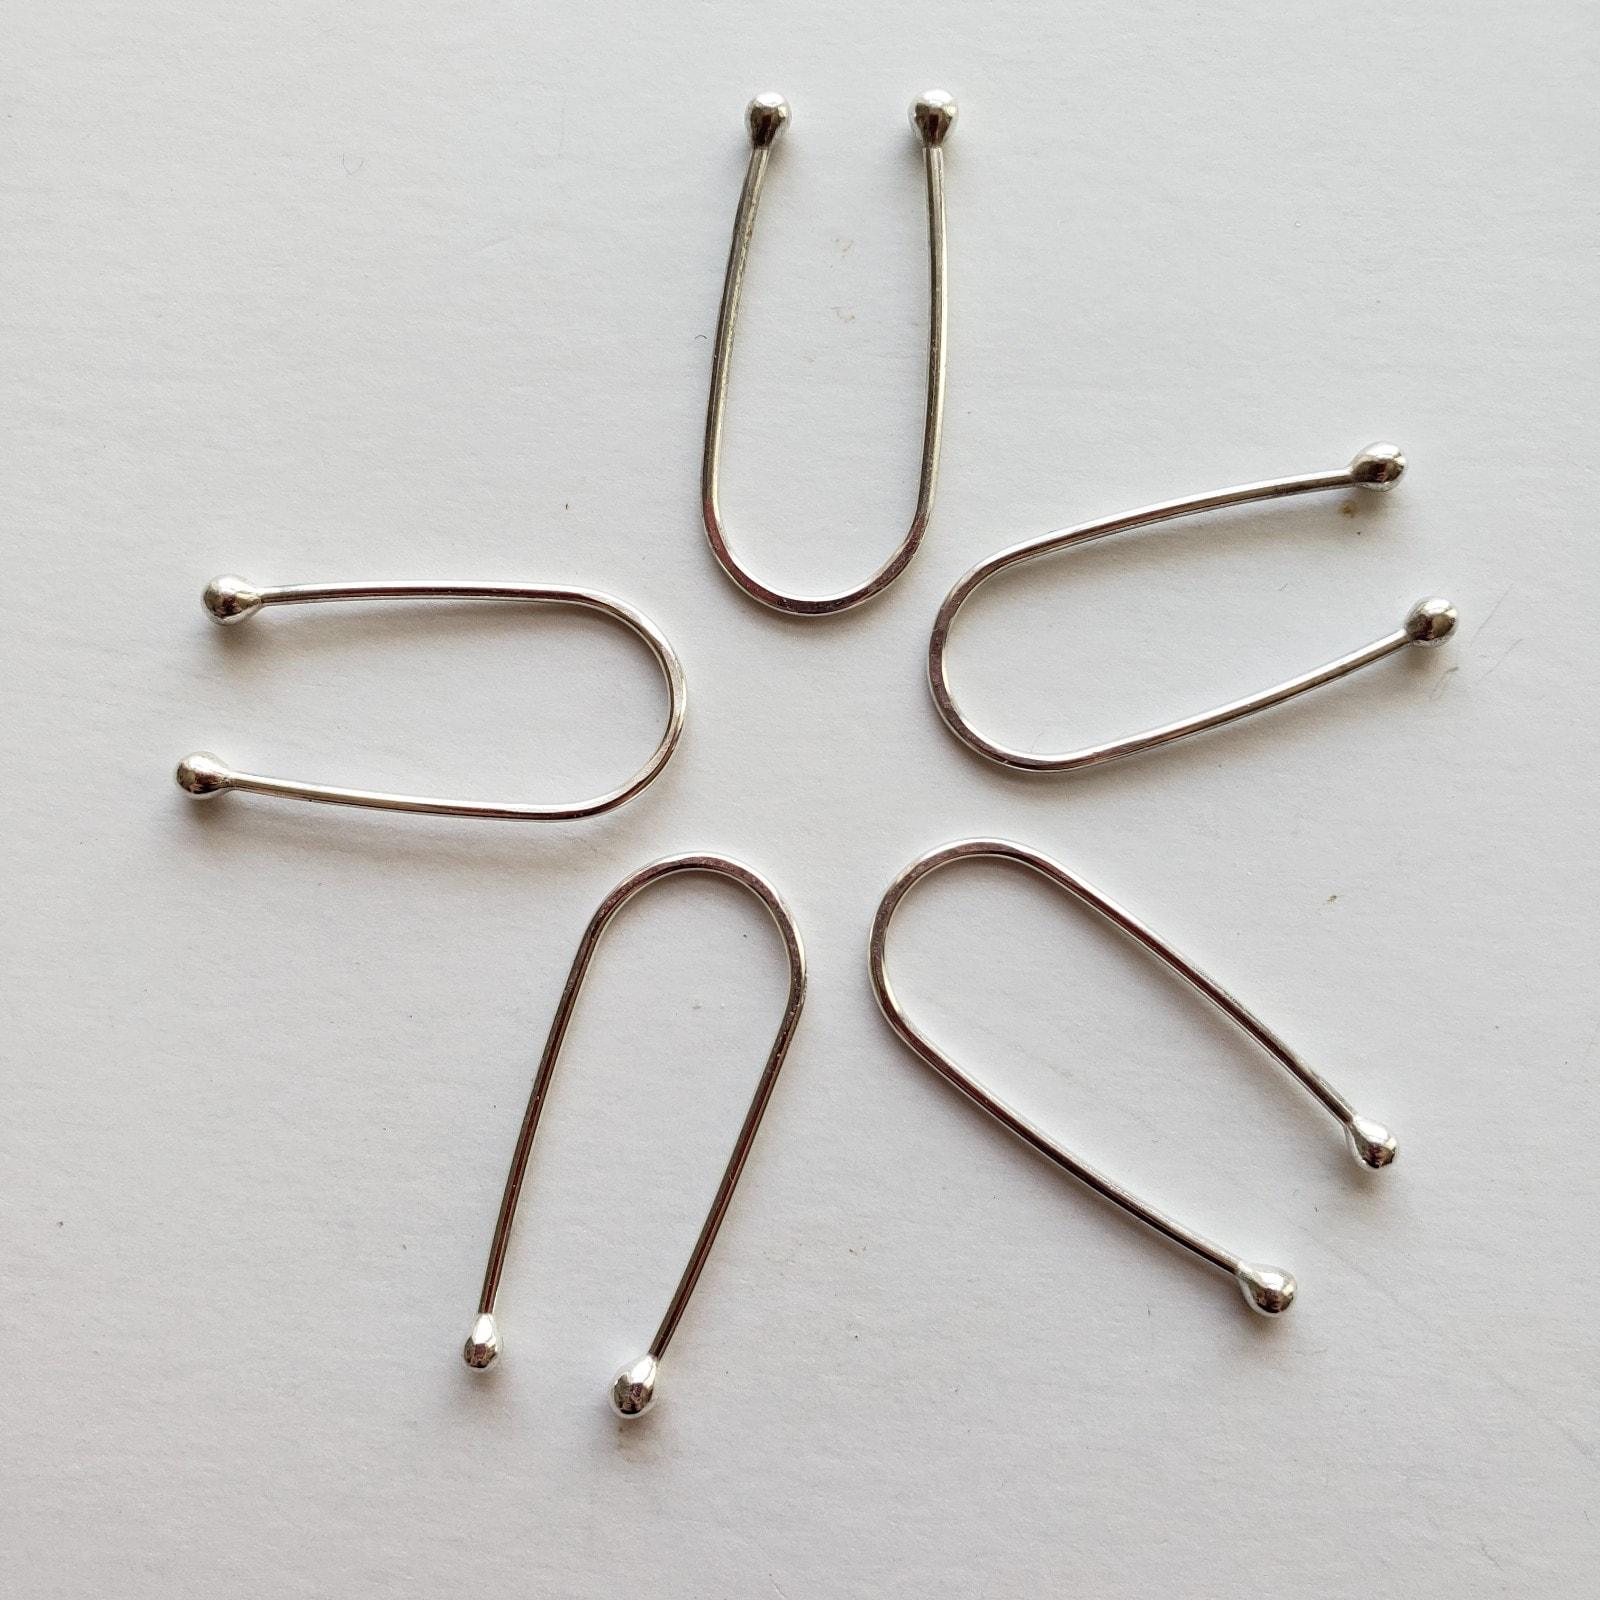 Sterling silver stitch markers for knitting and crochet, small cable  needles now in 2 sizes